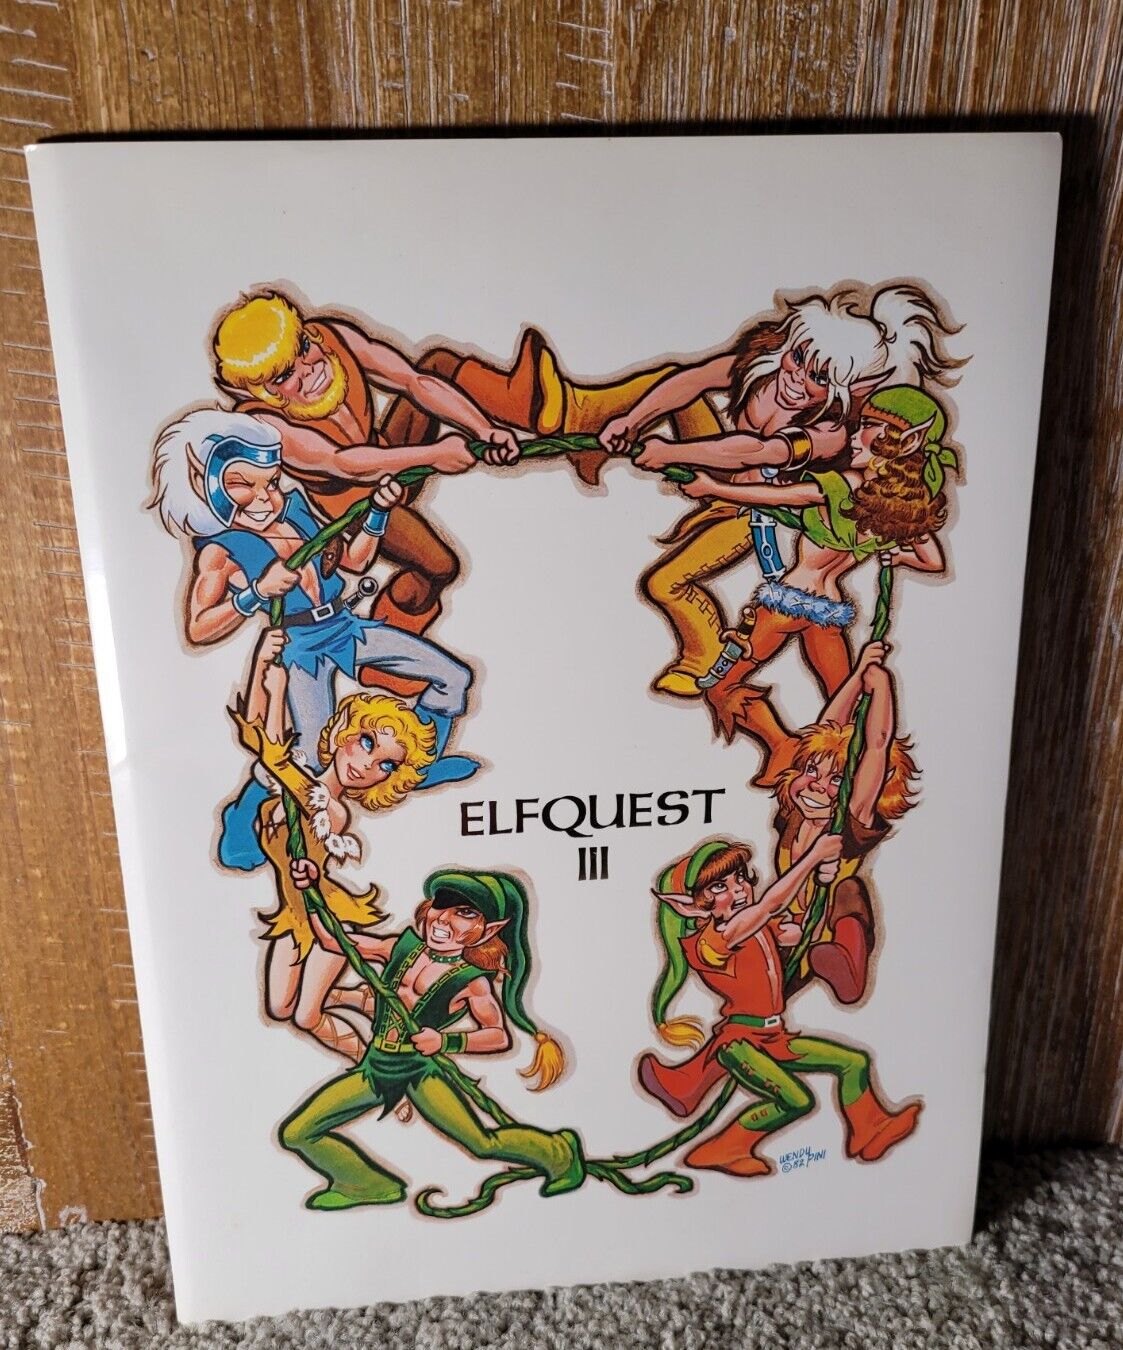 ELFQUEST III Portfolio w/ 12 Color Plates 1982 Signed by Wendy Pini #450 of 3000